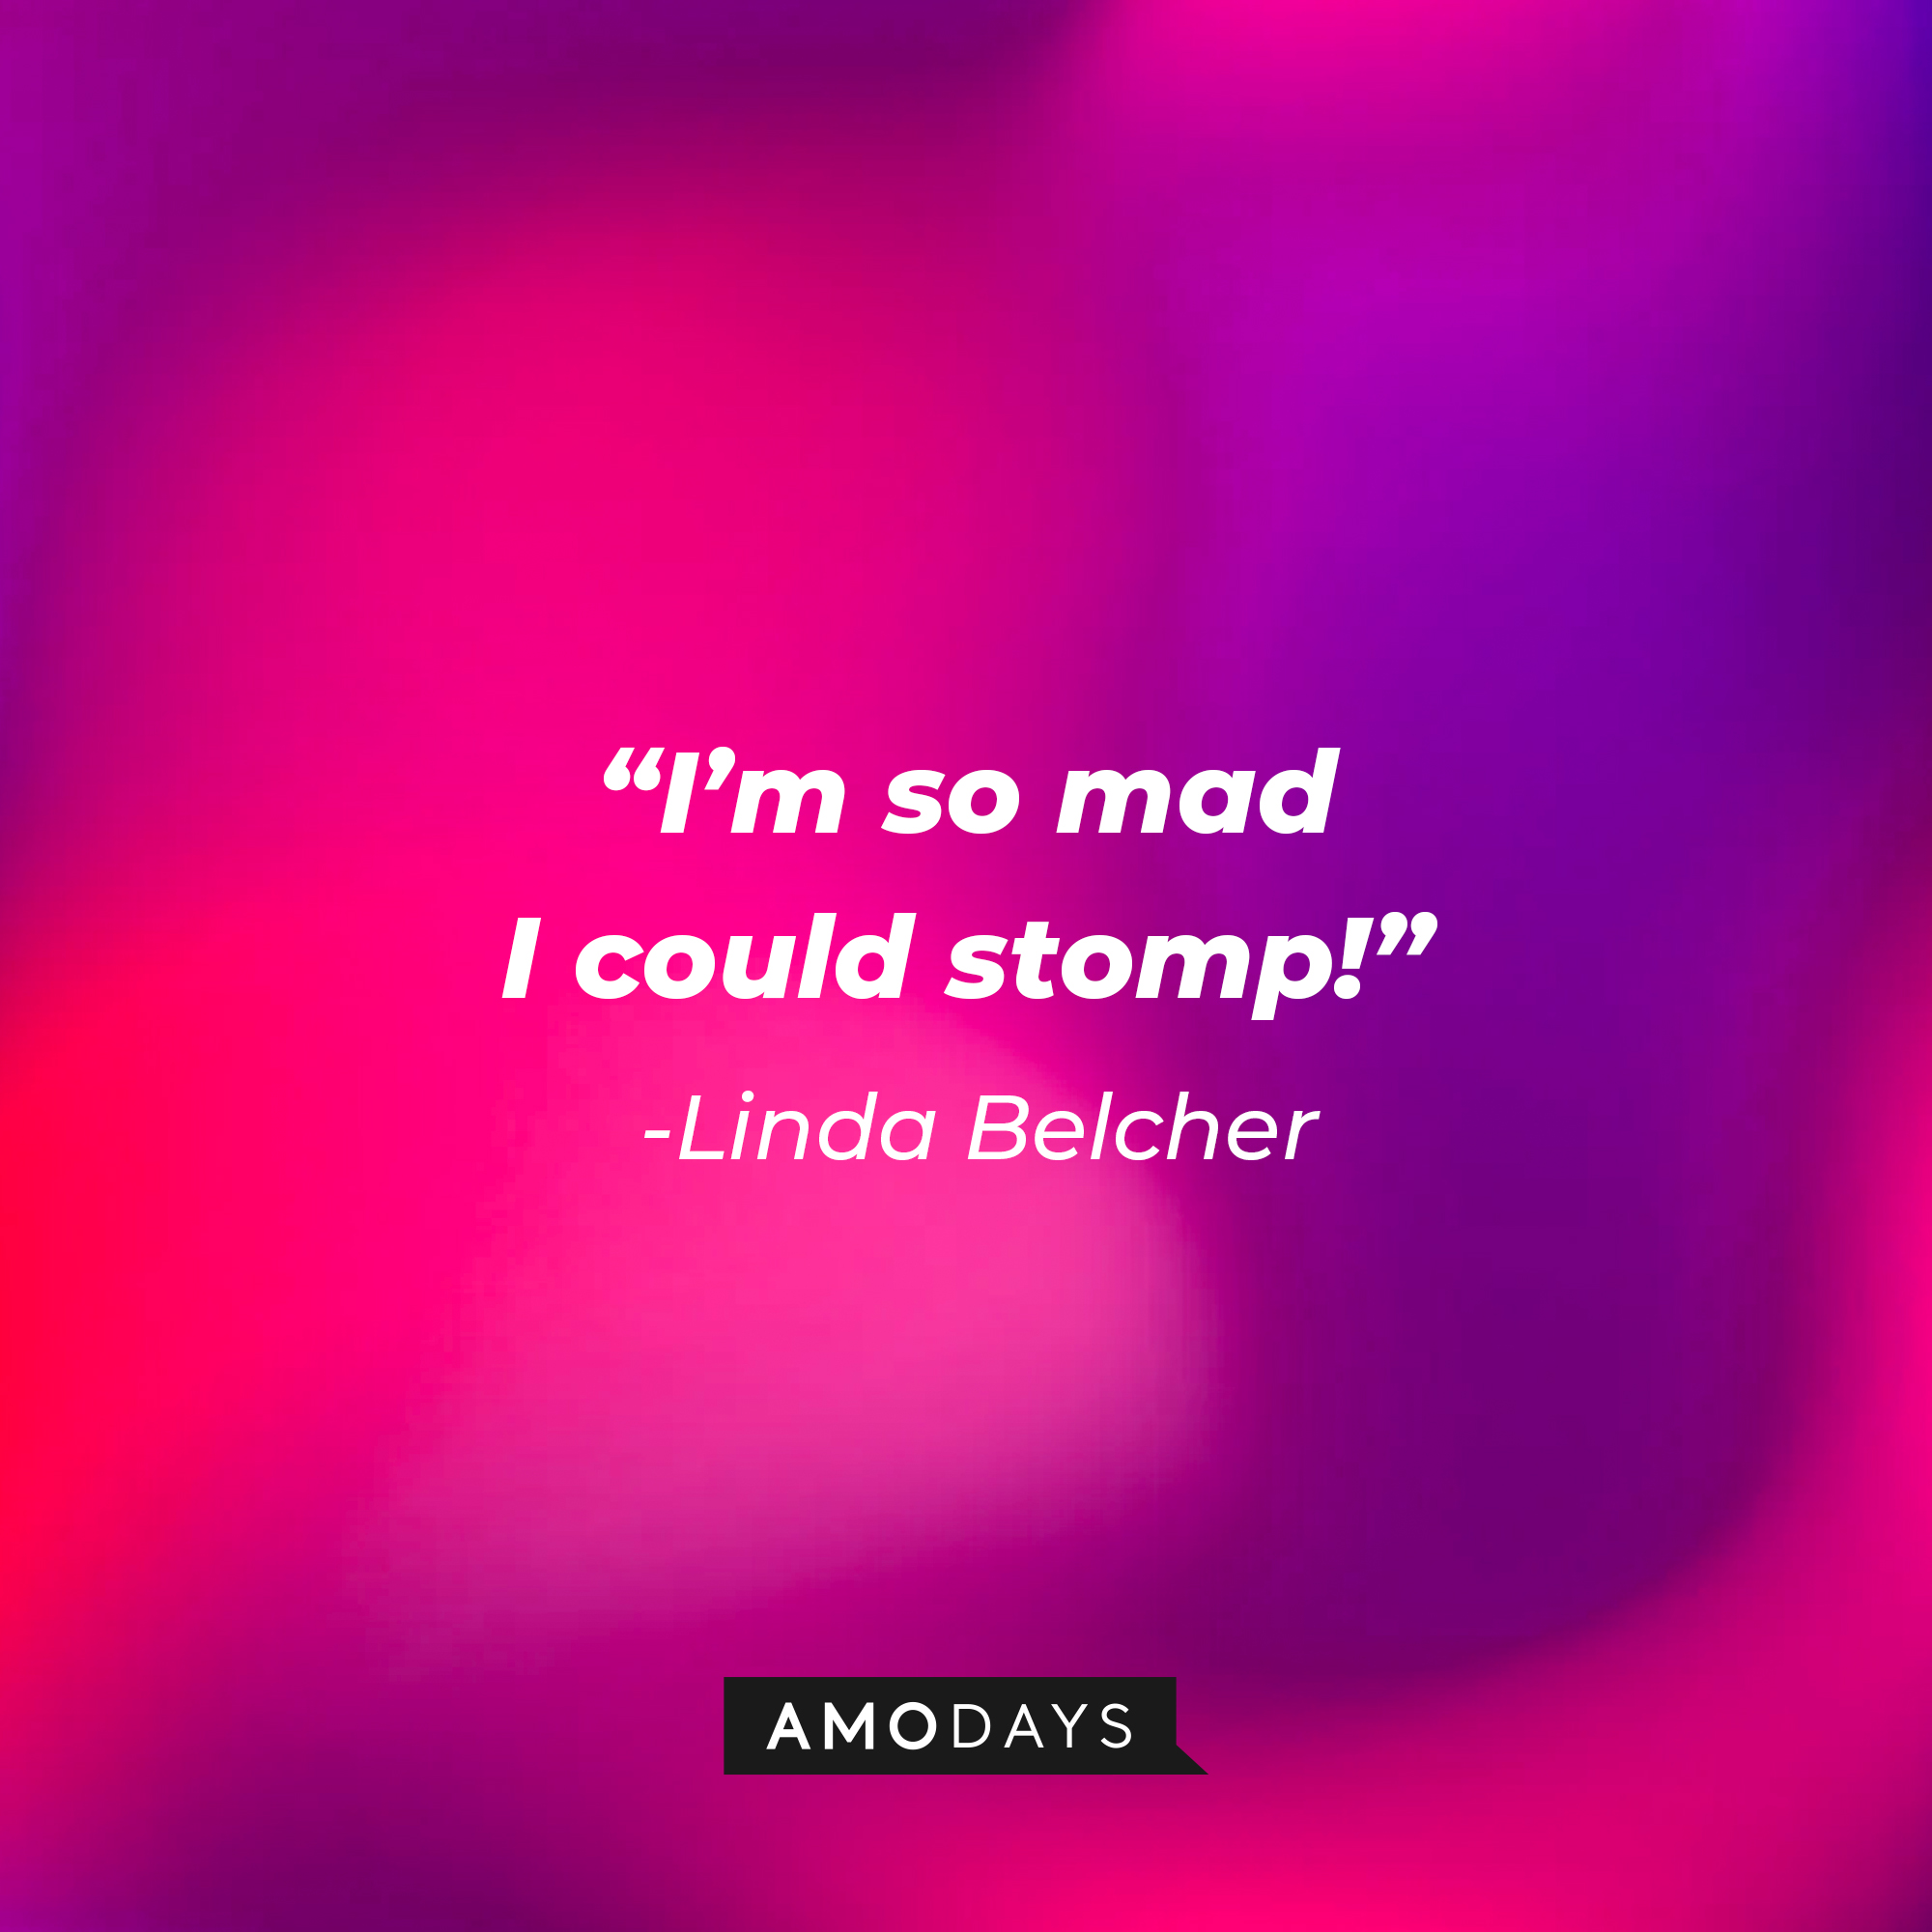 Linda Belcher’s quote:"I’m so mad I could stomp!” | Source: AmoDays